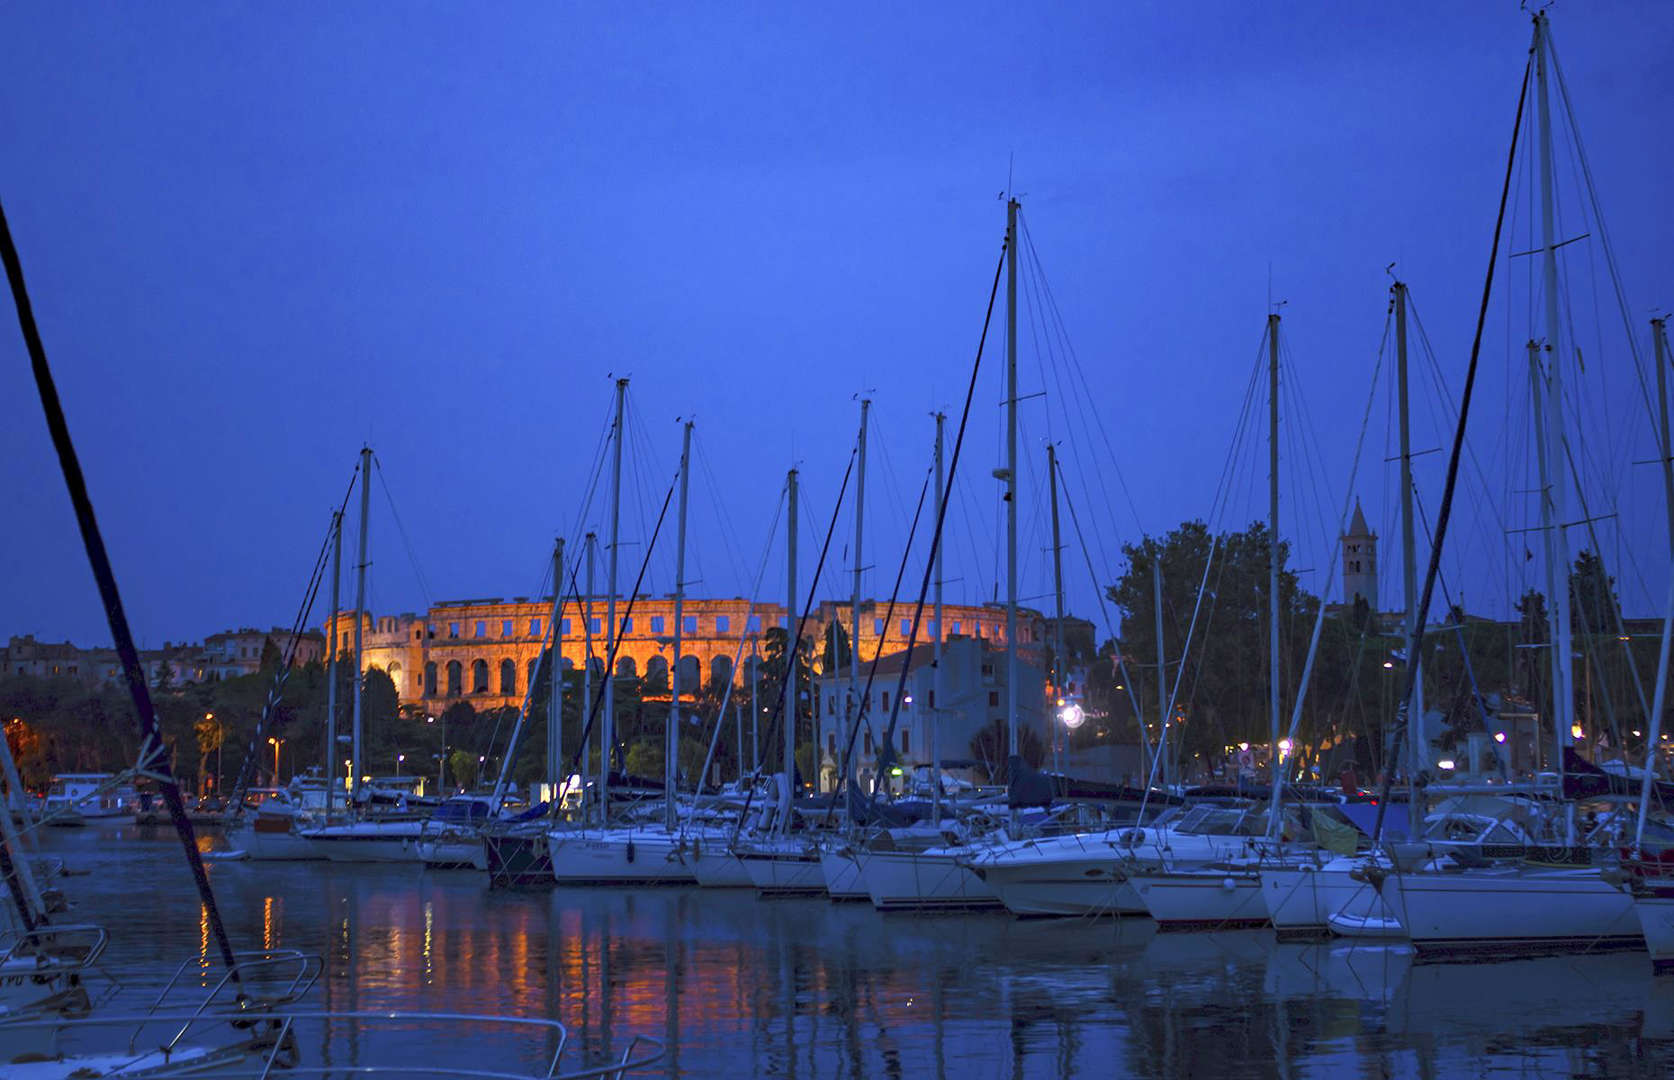 Slide 19 of 41: In this present-day night shot, Pula Arena is juxtaposed with its more modern surroundings. The harbour is crammed with sleek sail boats and lights glitter on the water at dusk. Today history buffs can explore the amphitheatre and it also typically hosts concerts, dance shows and festivals in place of bloody gladiatorial battles.